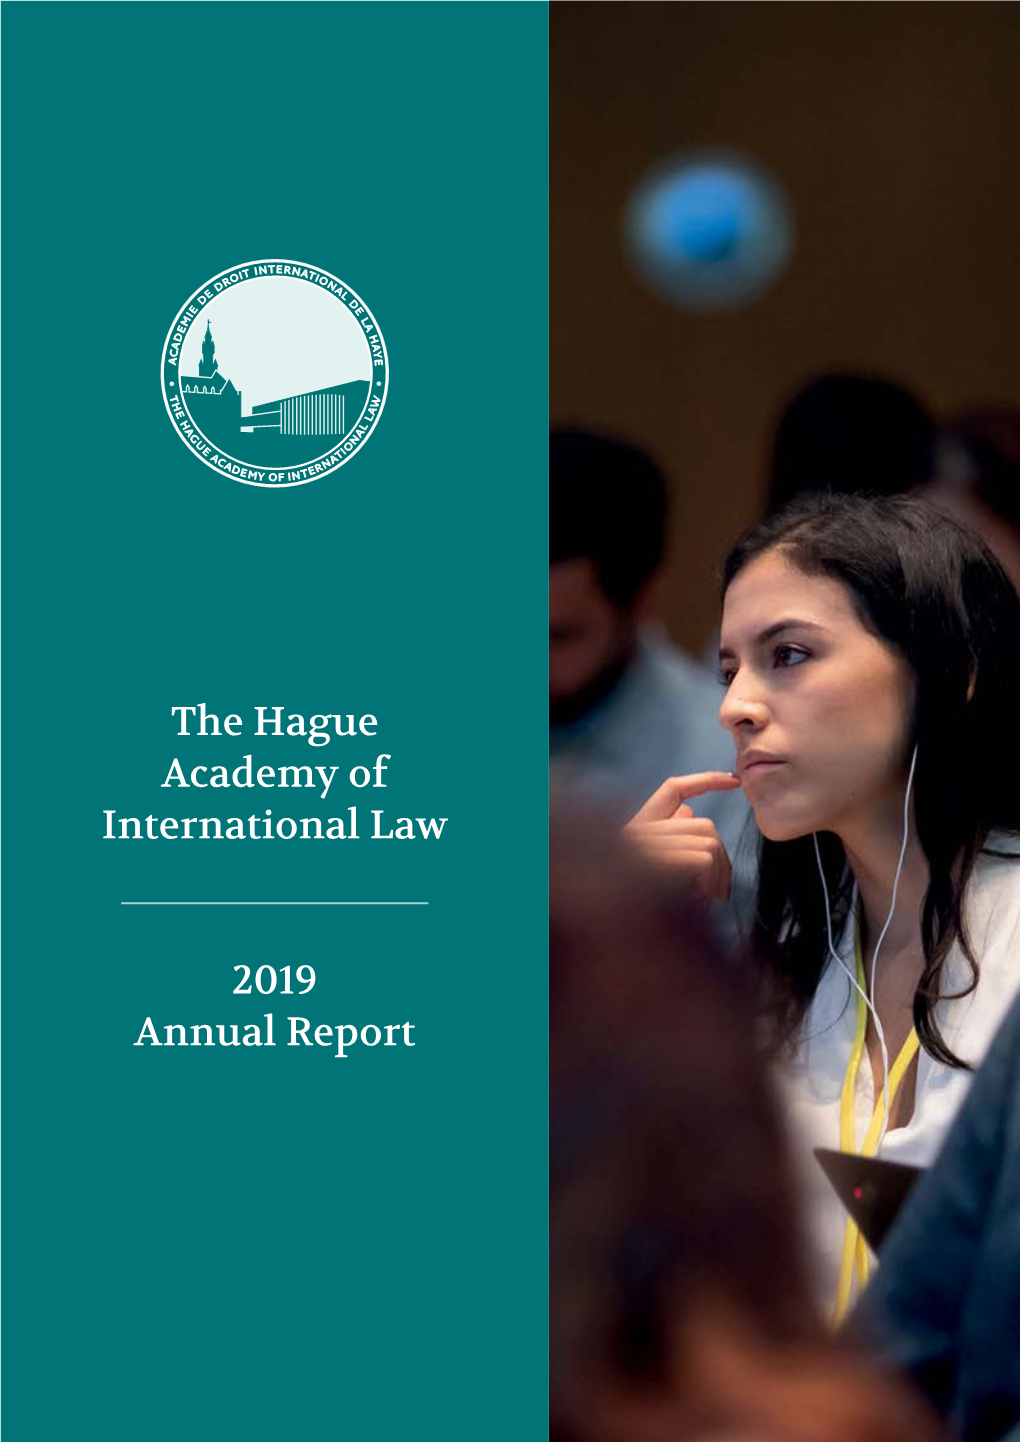 The Hague Academy of International Law 2019 Annual Report